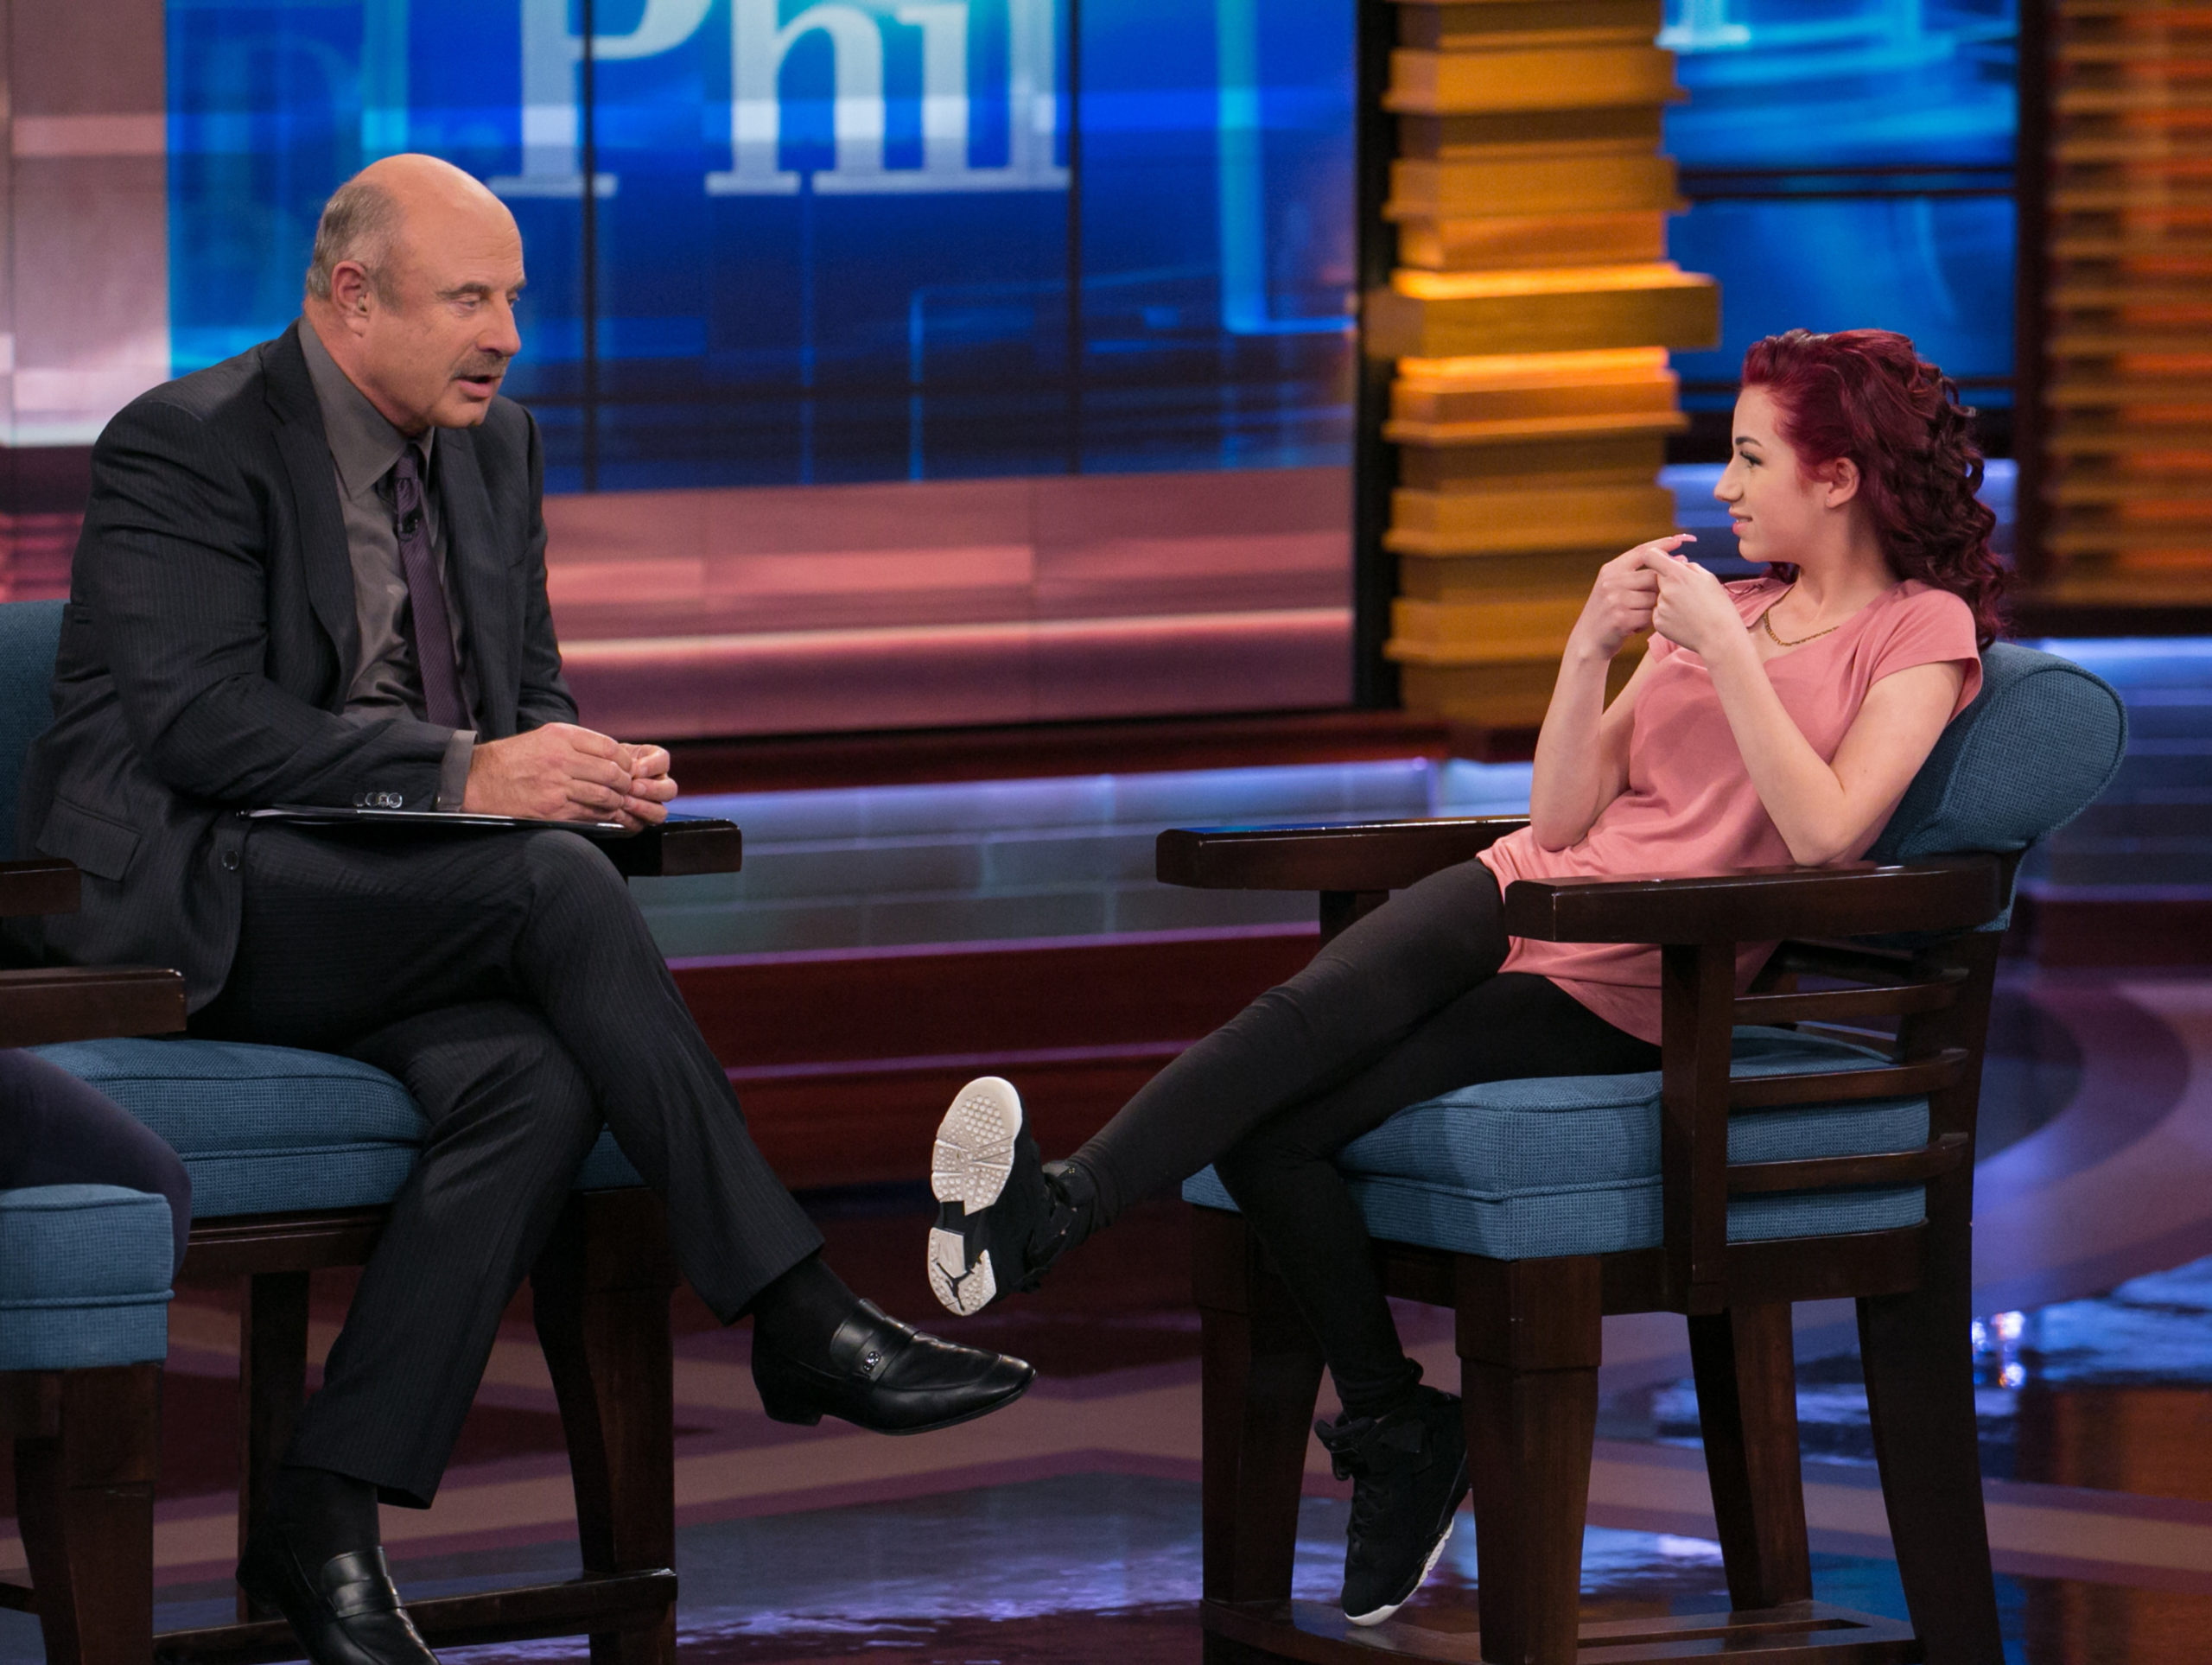 #Dr. Phil: Season 21; Syndicated Talk Show to End with Current 2022-23 Season